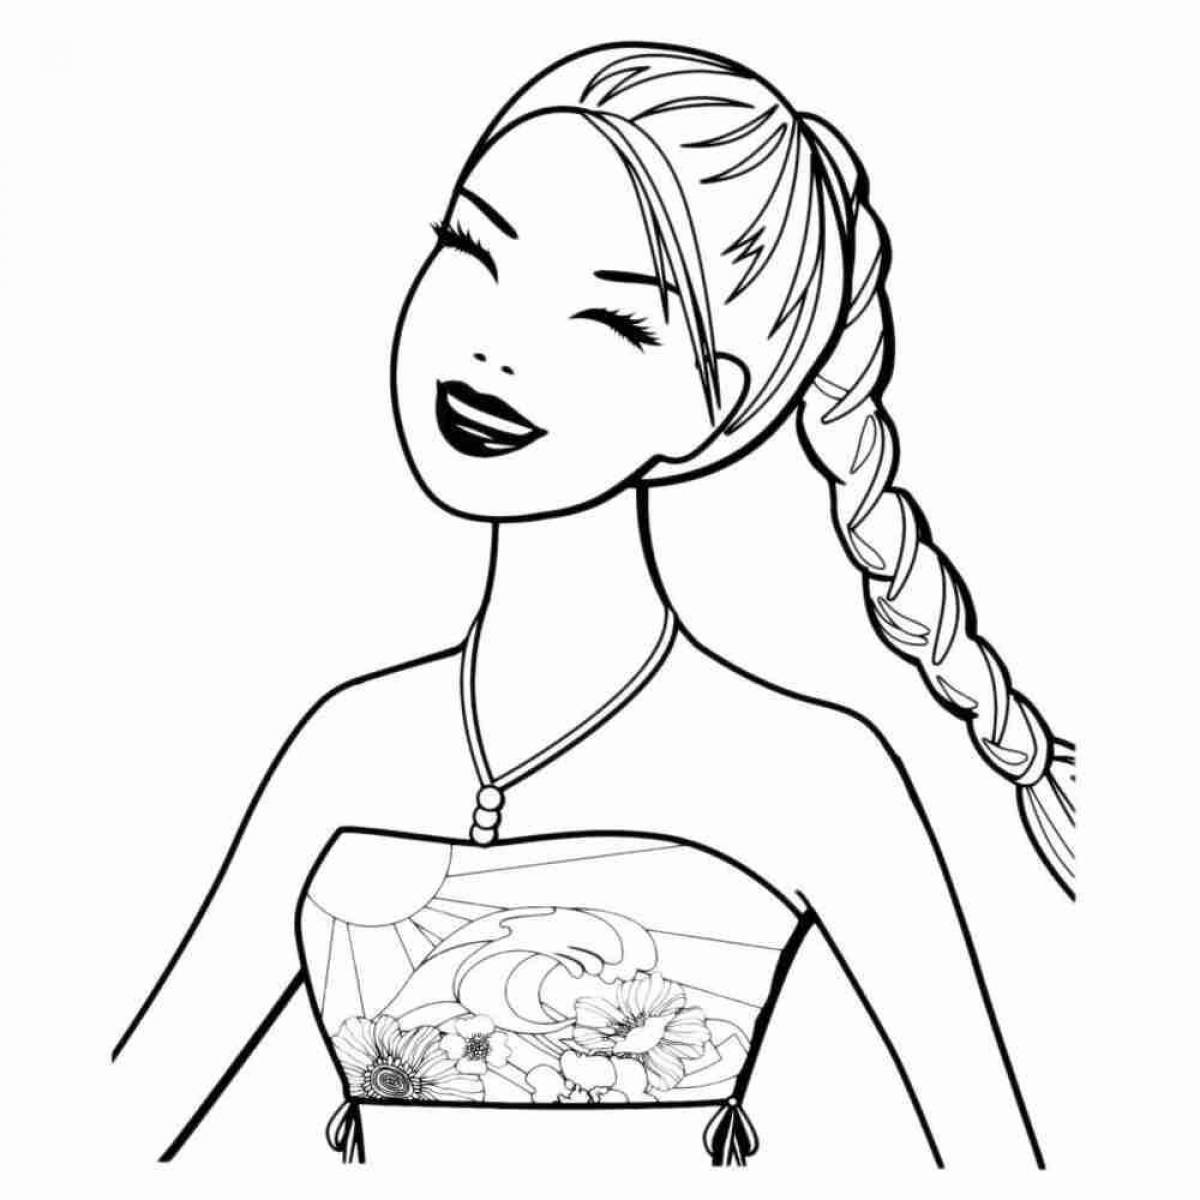 Radiant Thursday 2022 Coloring Page